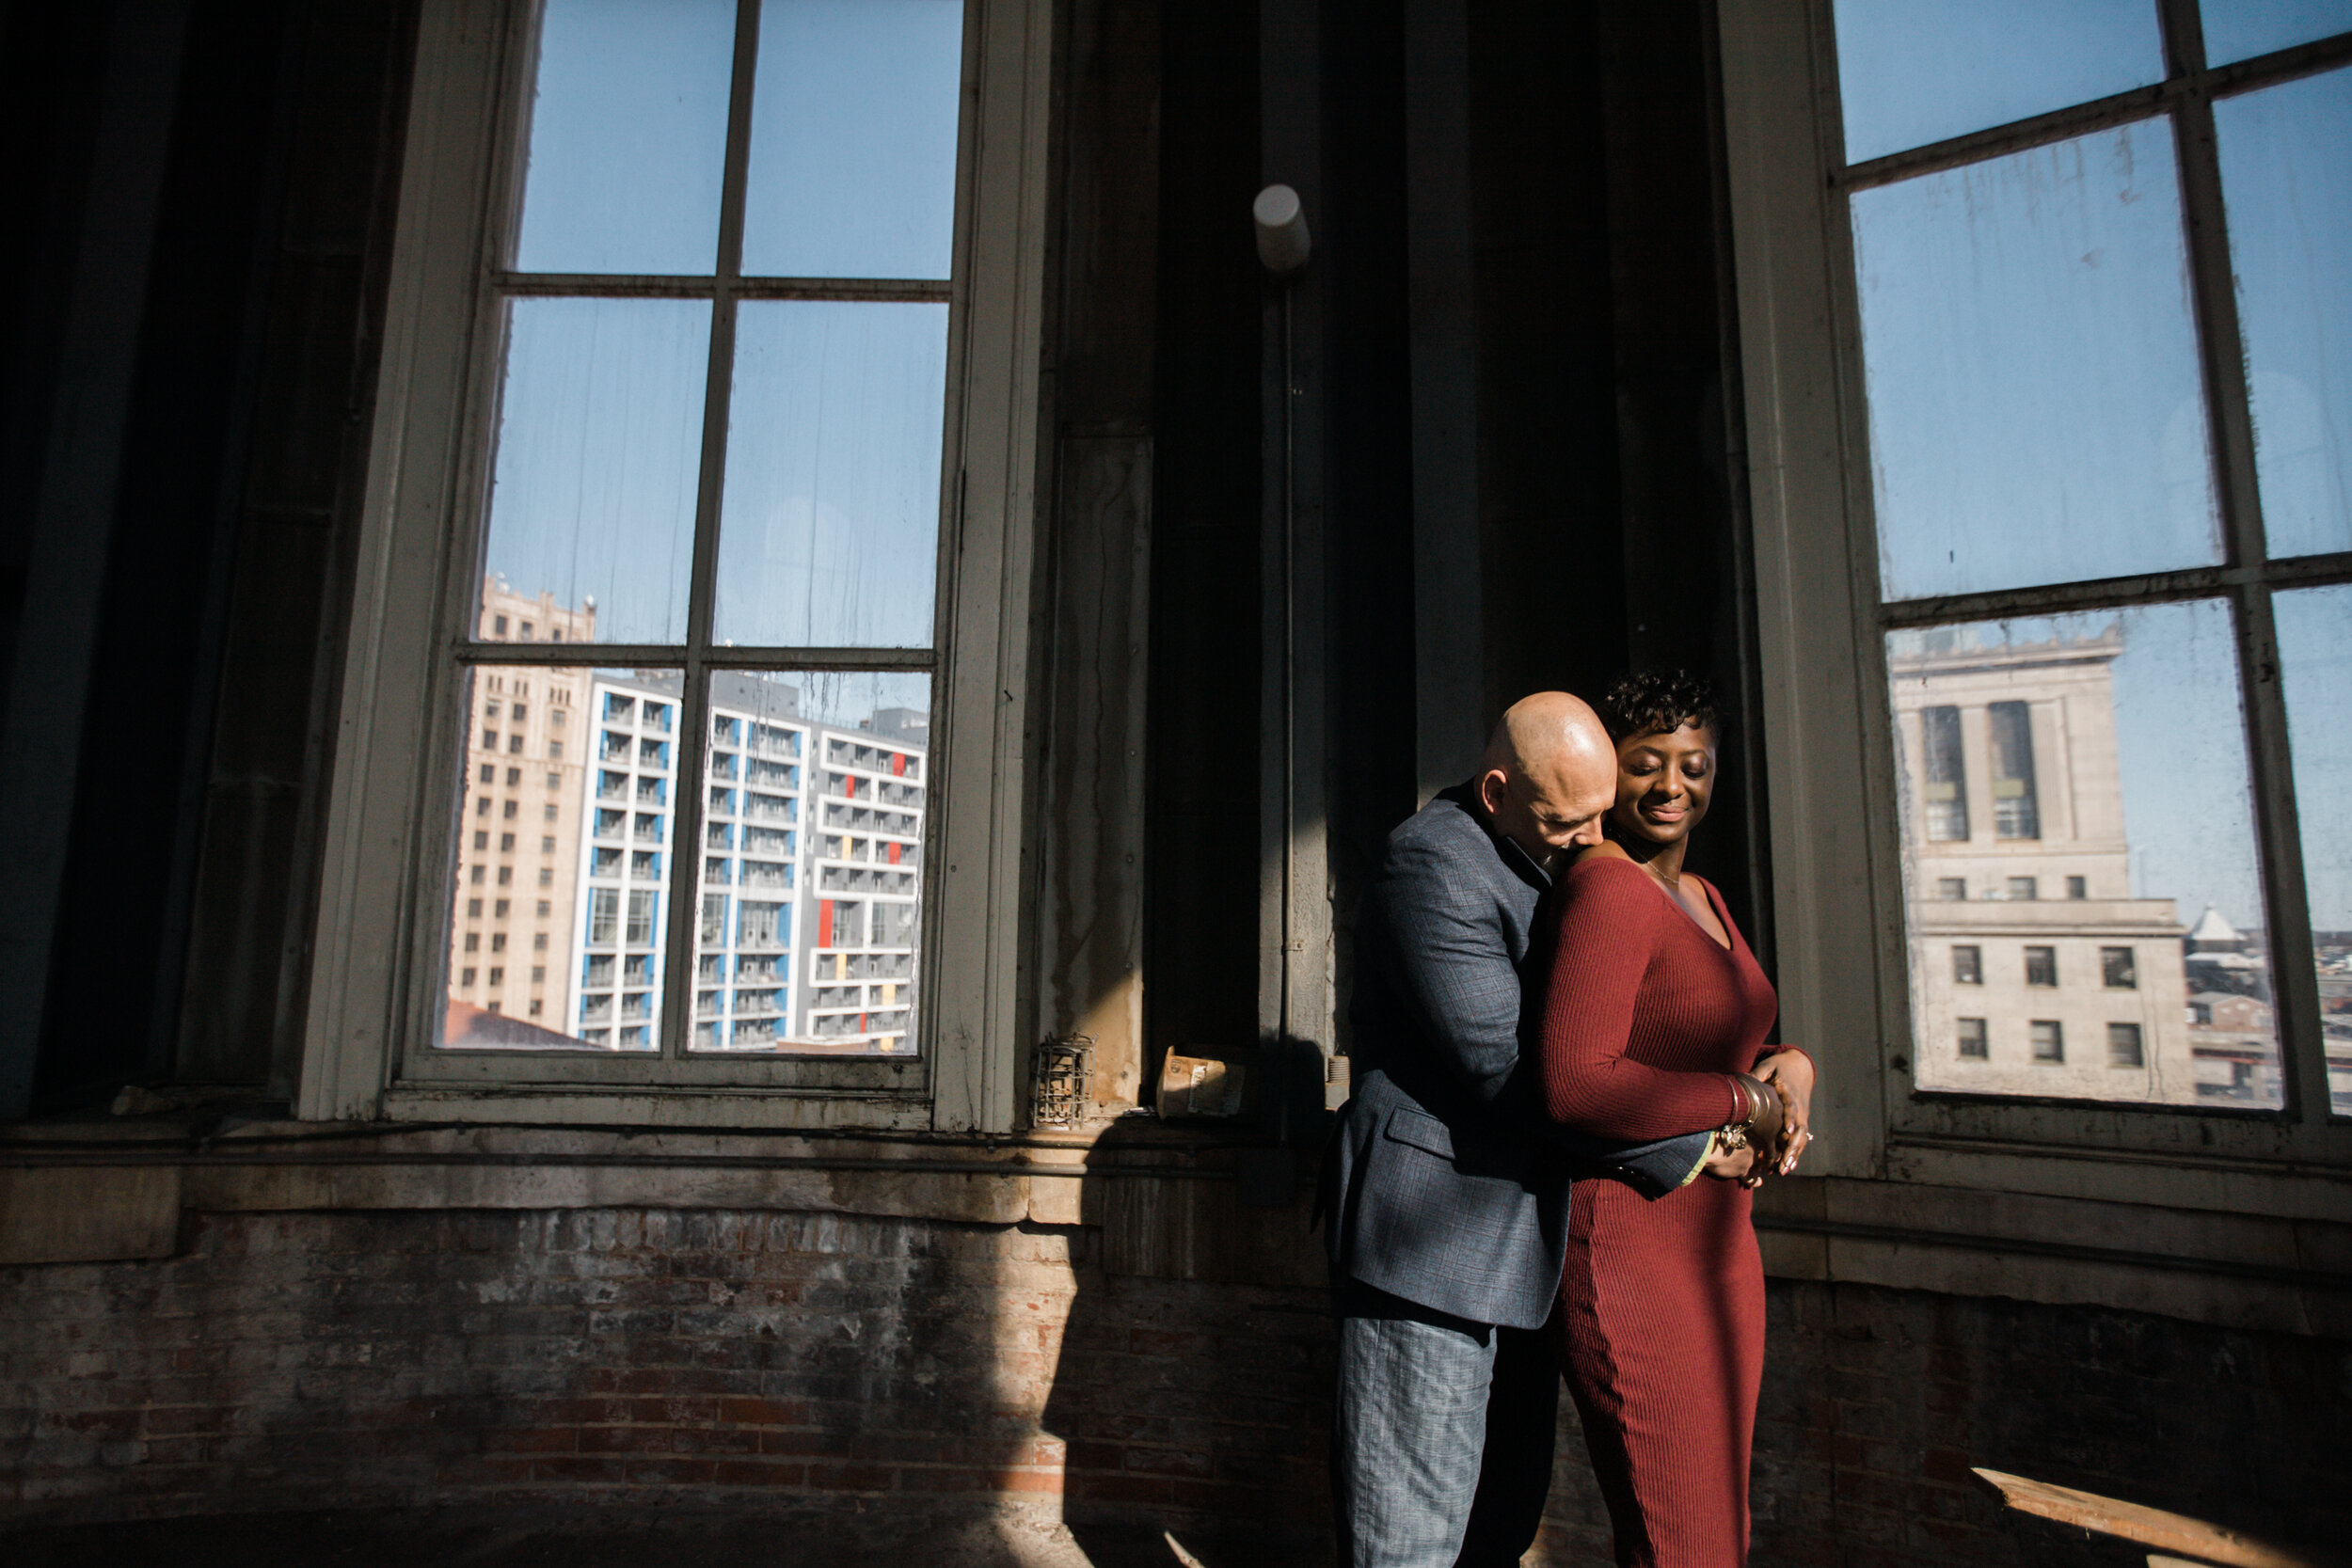 Beautiful Engagement Session at Baltimore City Hall by Baltimores Best Wedding Photographers Megapixels Media Black Wedding Photographers-32.jpg